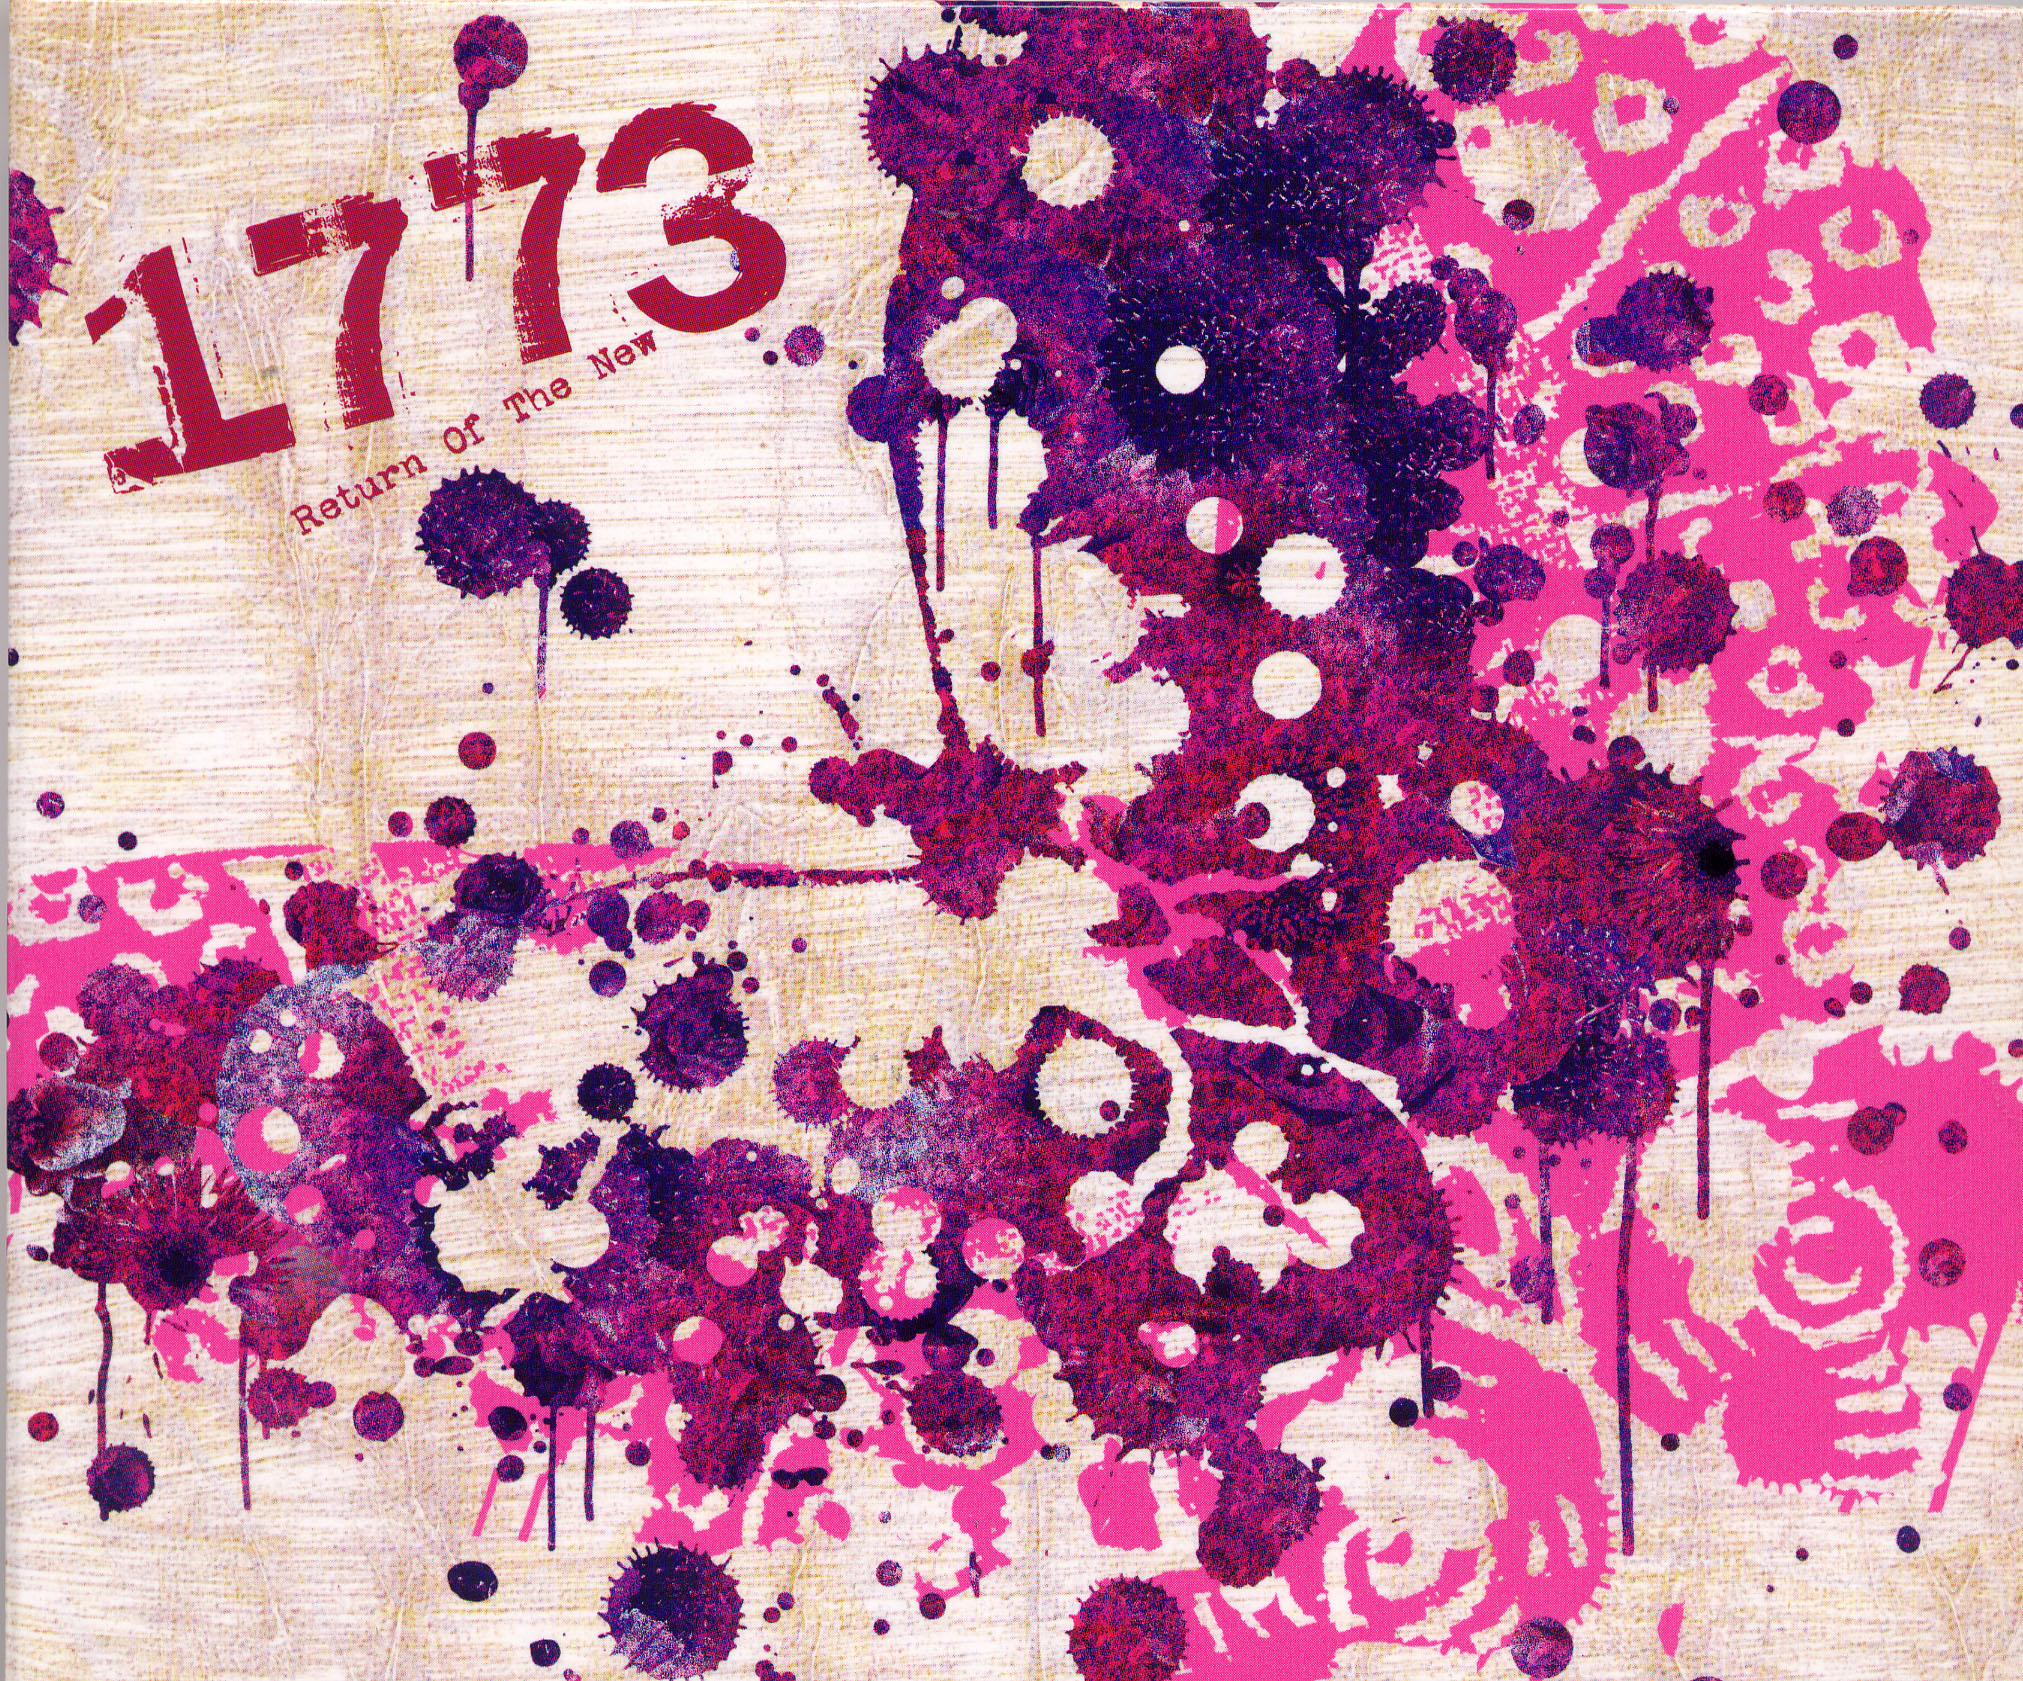 News: 1773 released first out of five 2010 releases